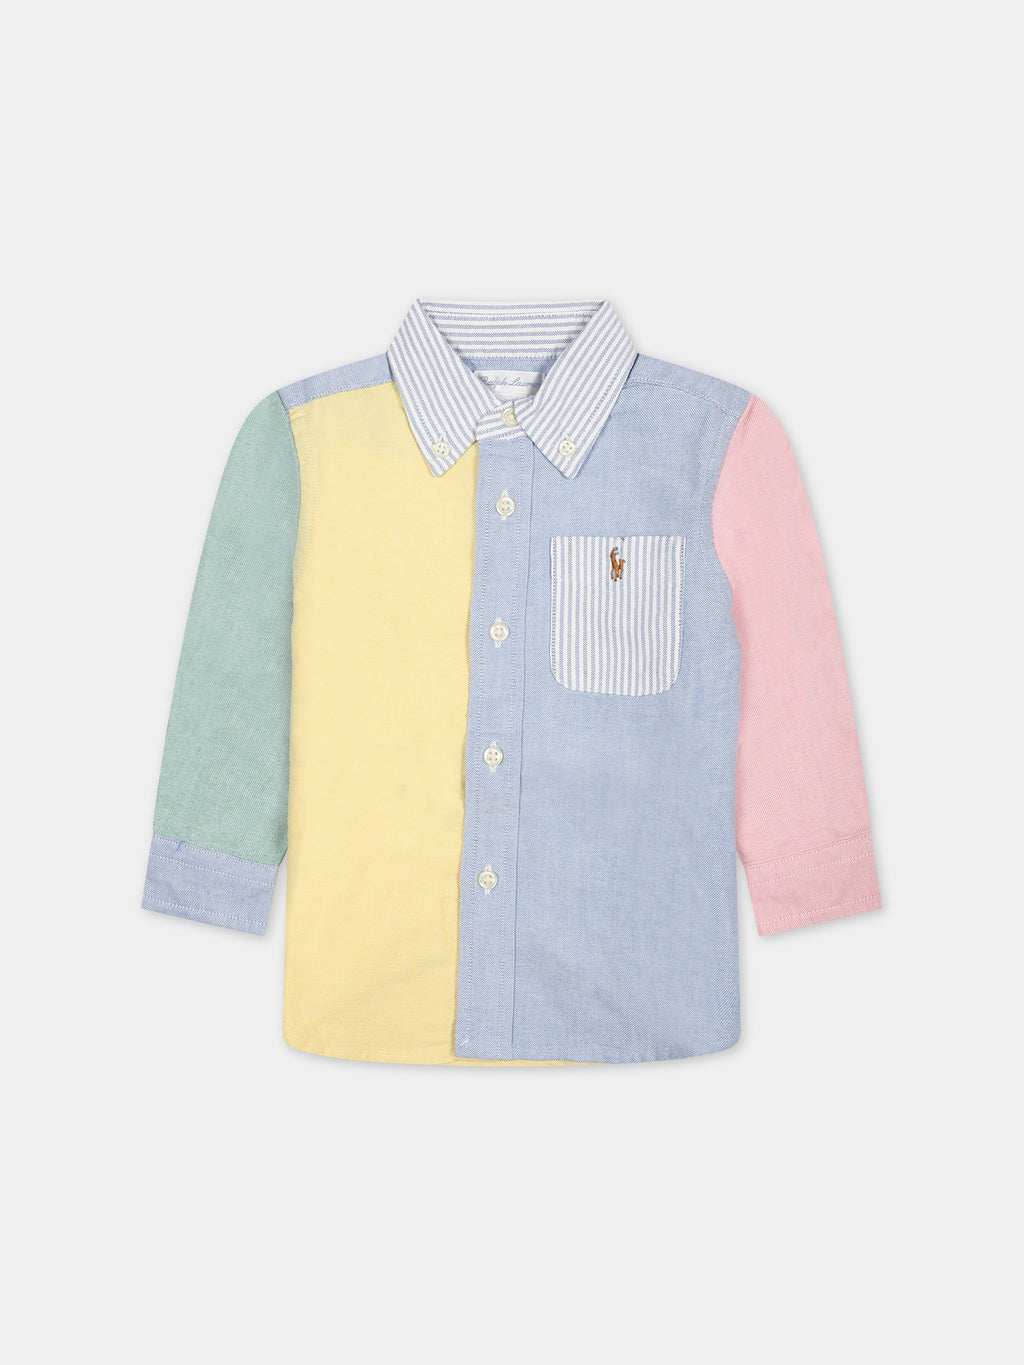 Multicolored shirt for babies with logo